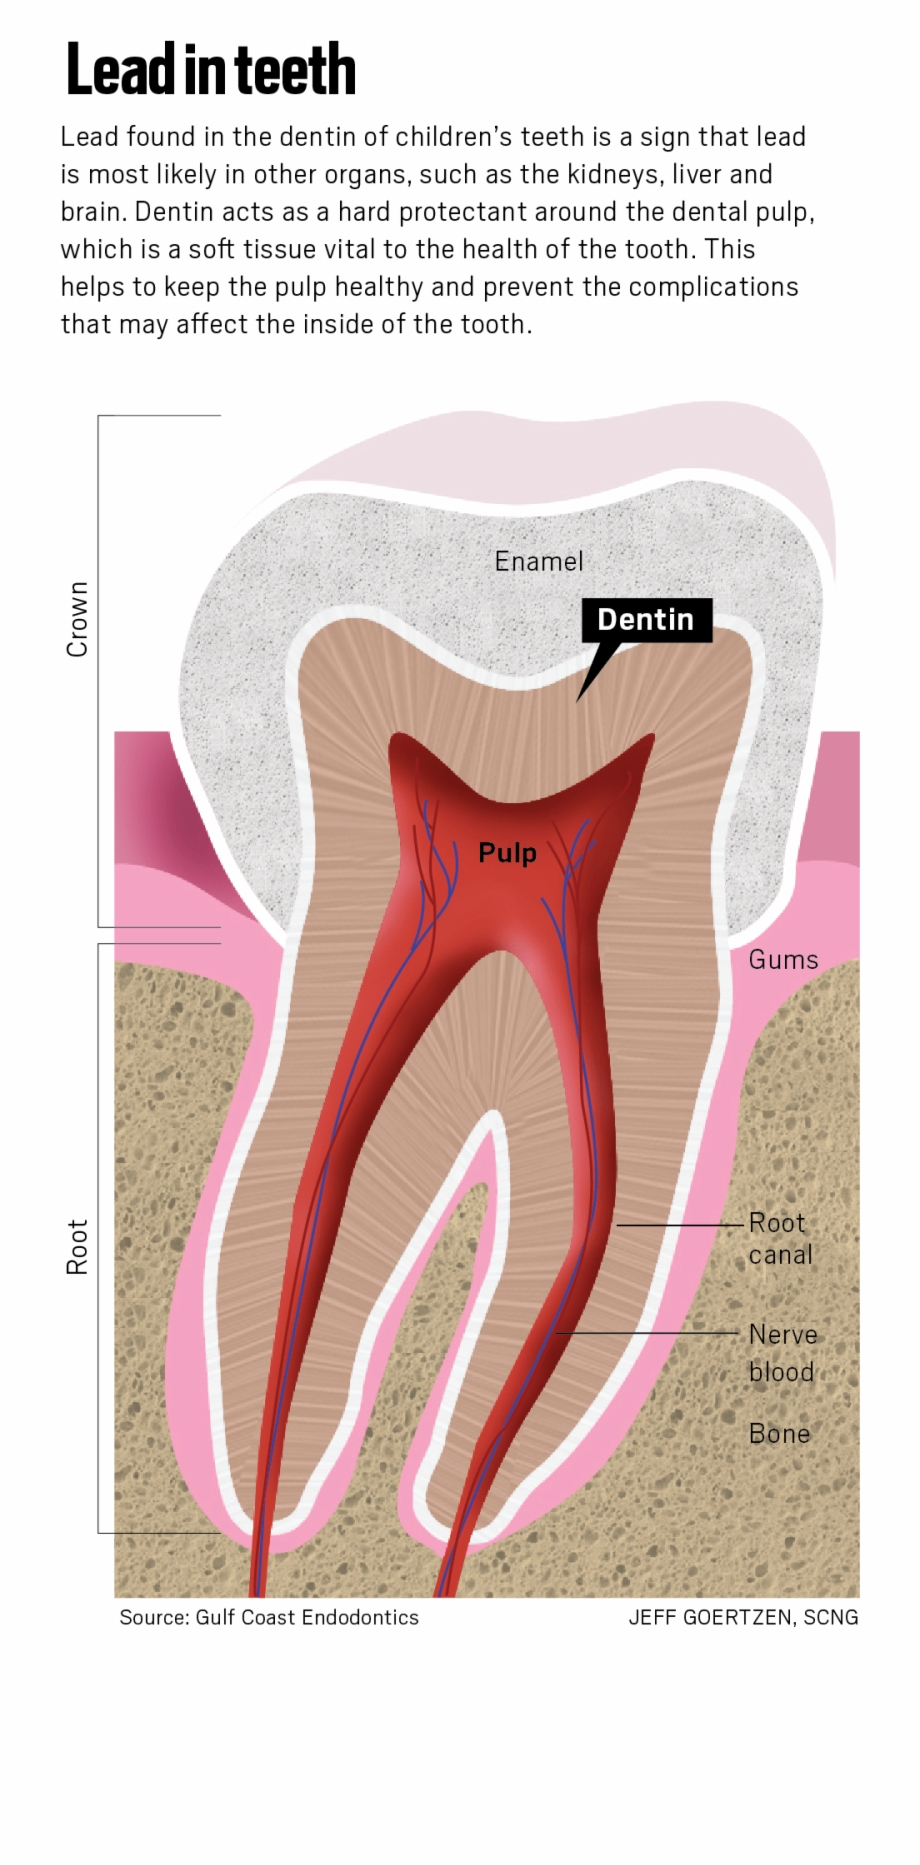 Diagram Of Teeth Teeth Mean Higher Levels In Other Parts Of The Body Diagram